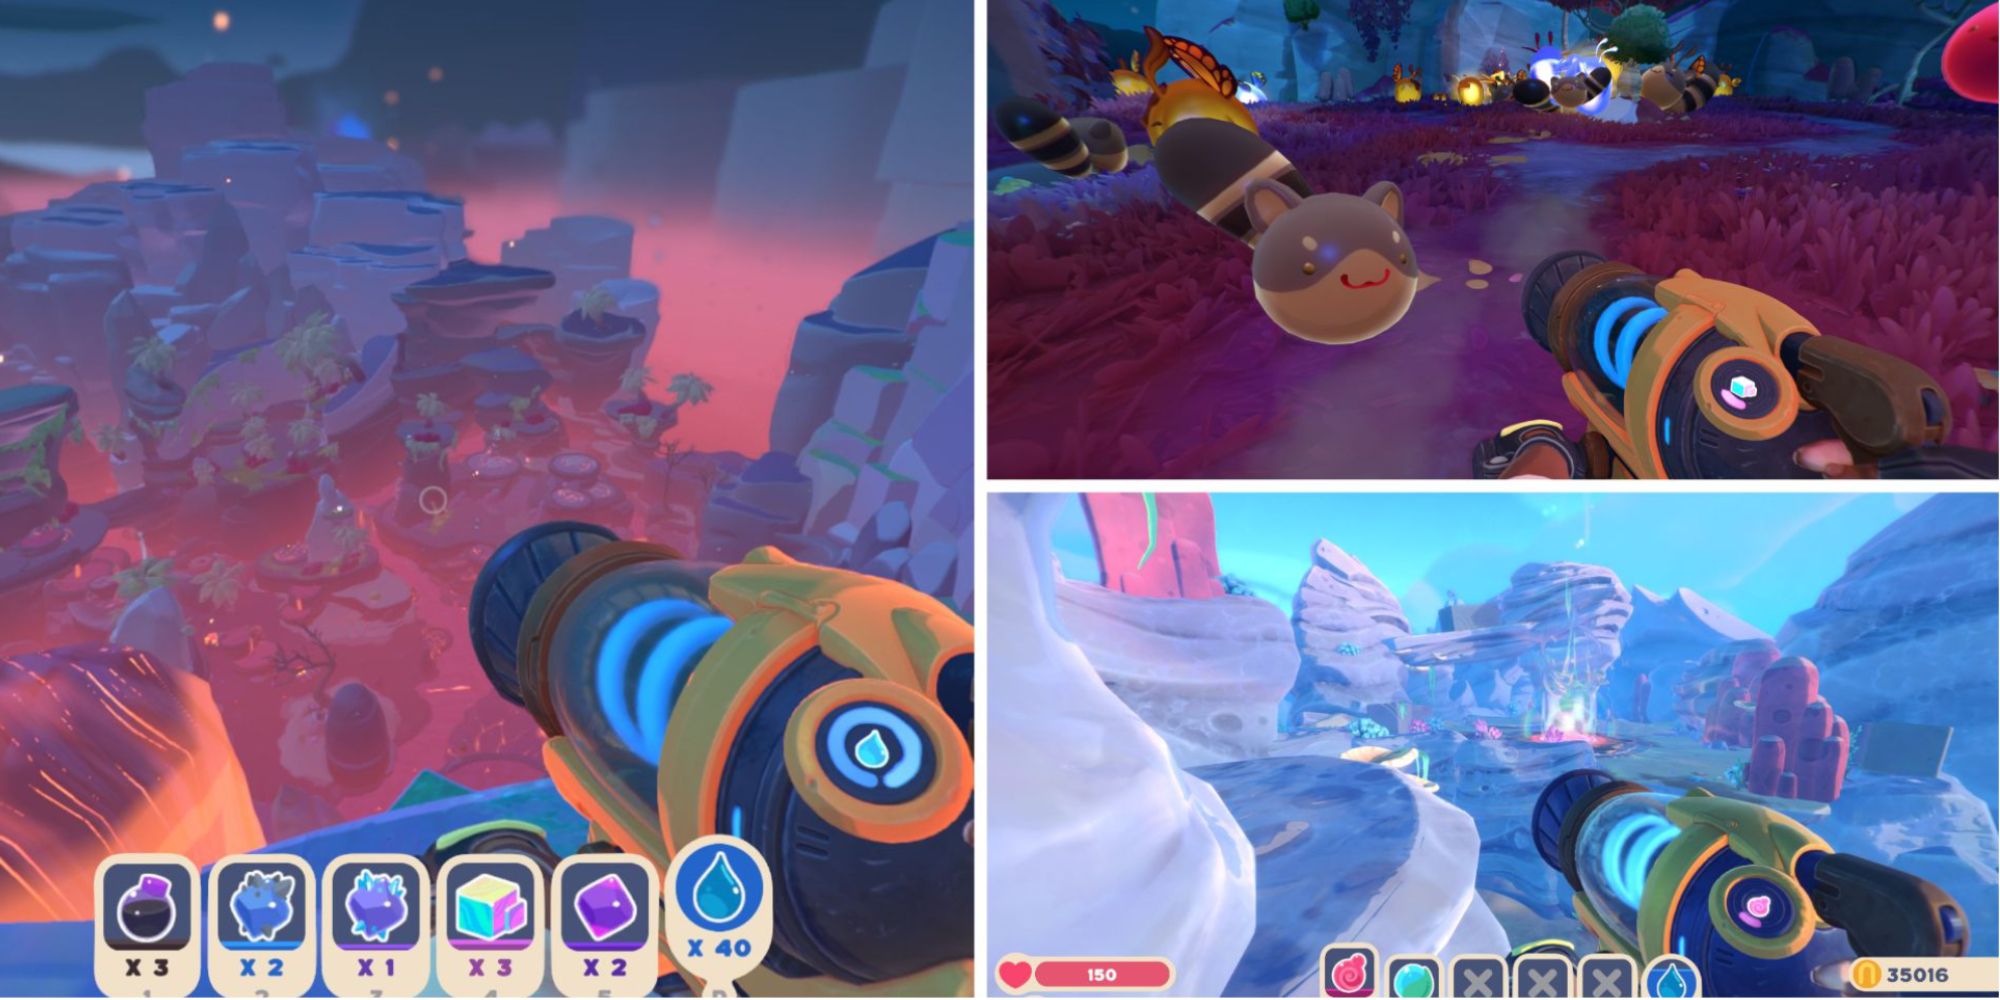 Slime Rancher 2 Featuring Ringtail Slimes and Nice Screenshots no border